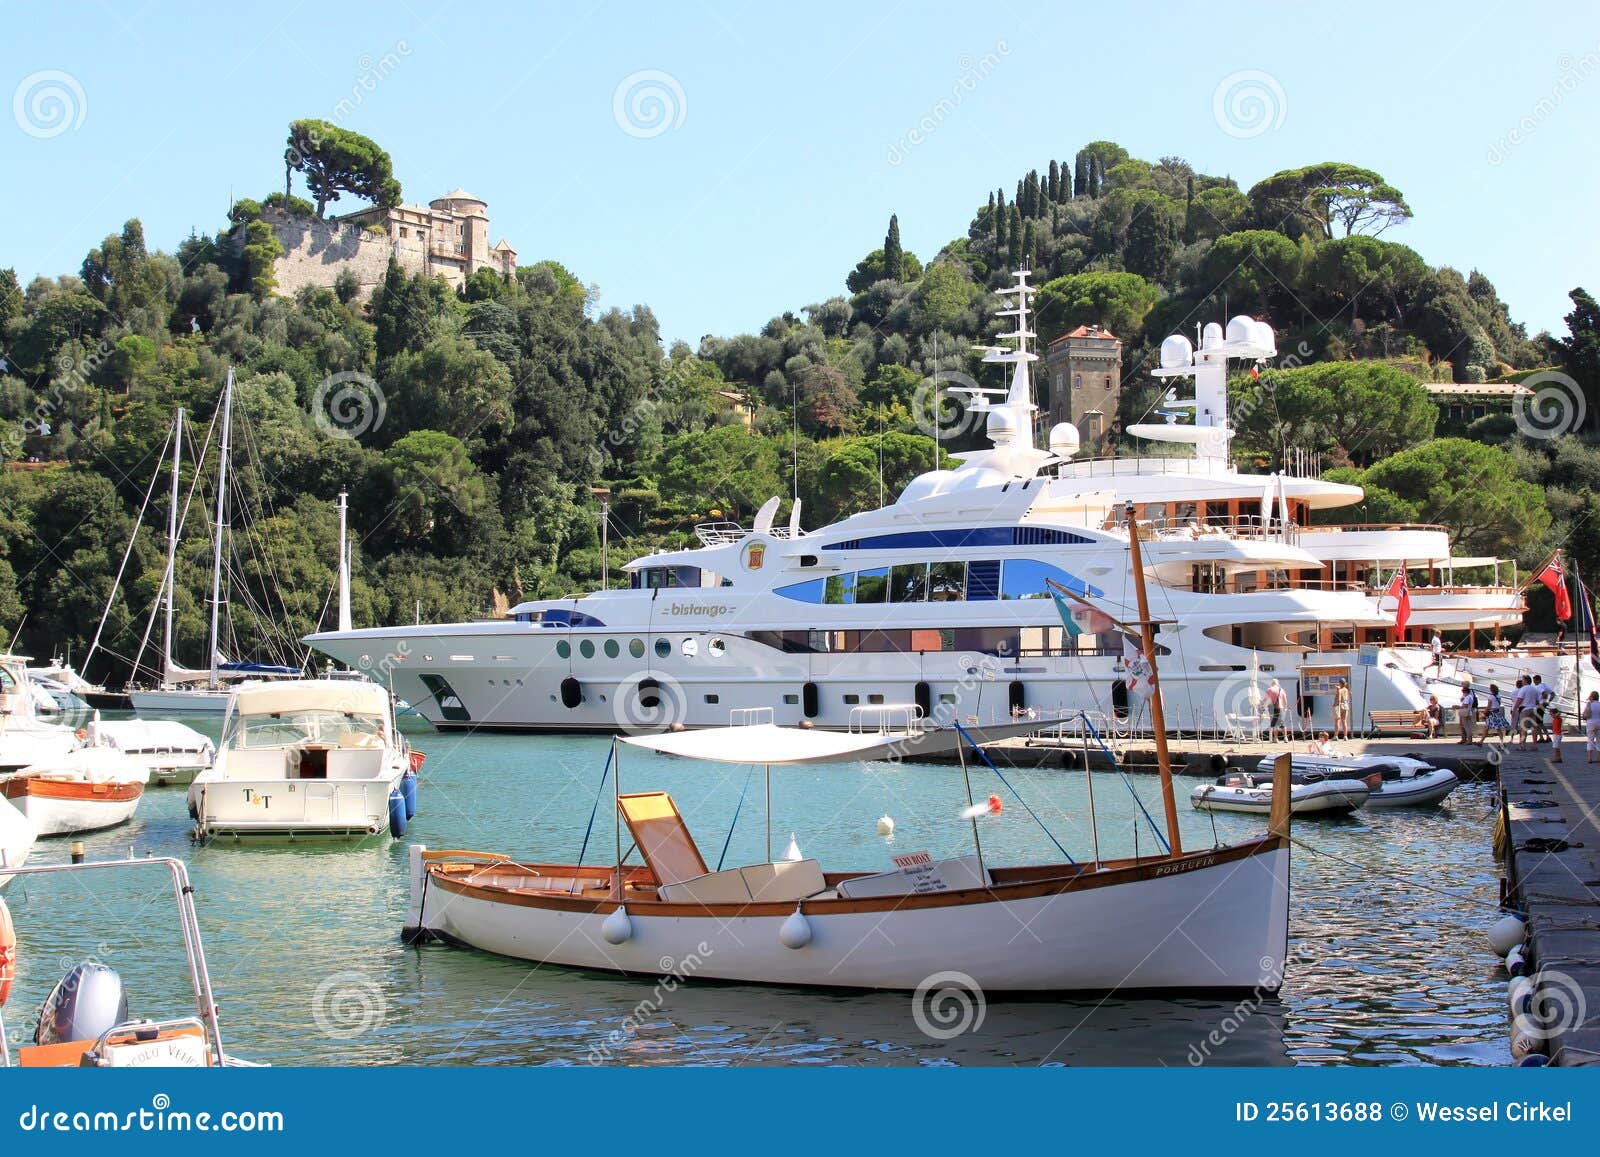 yacht harbours italy